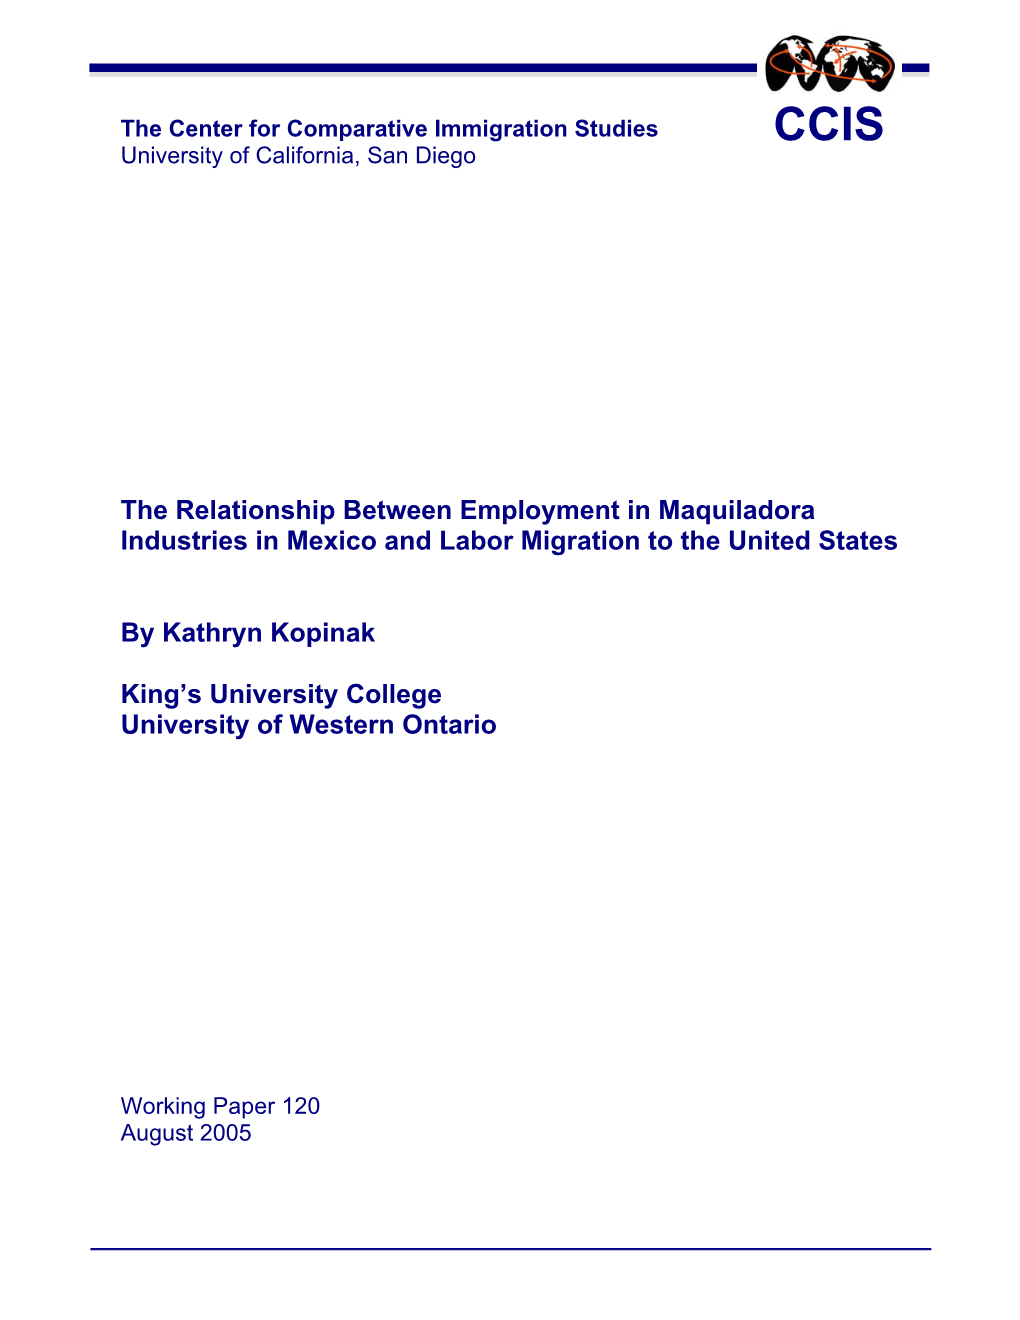 The Relationship Between Employment in Maquiladora Industries in Mexico and Labor Migration to the United States